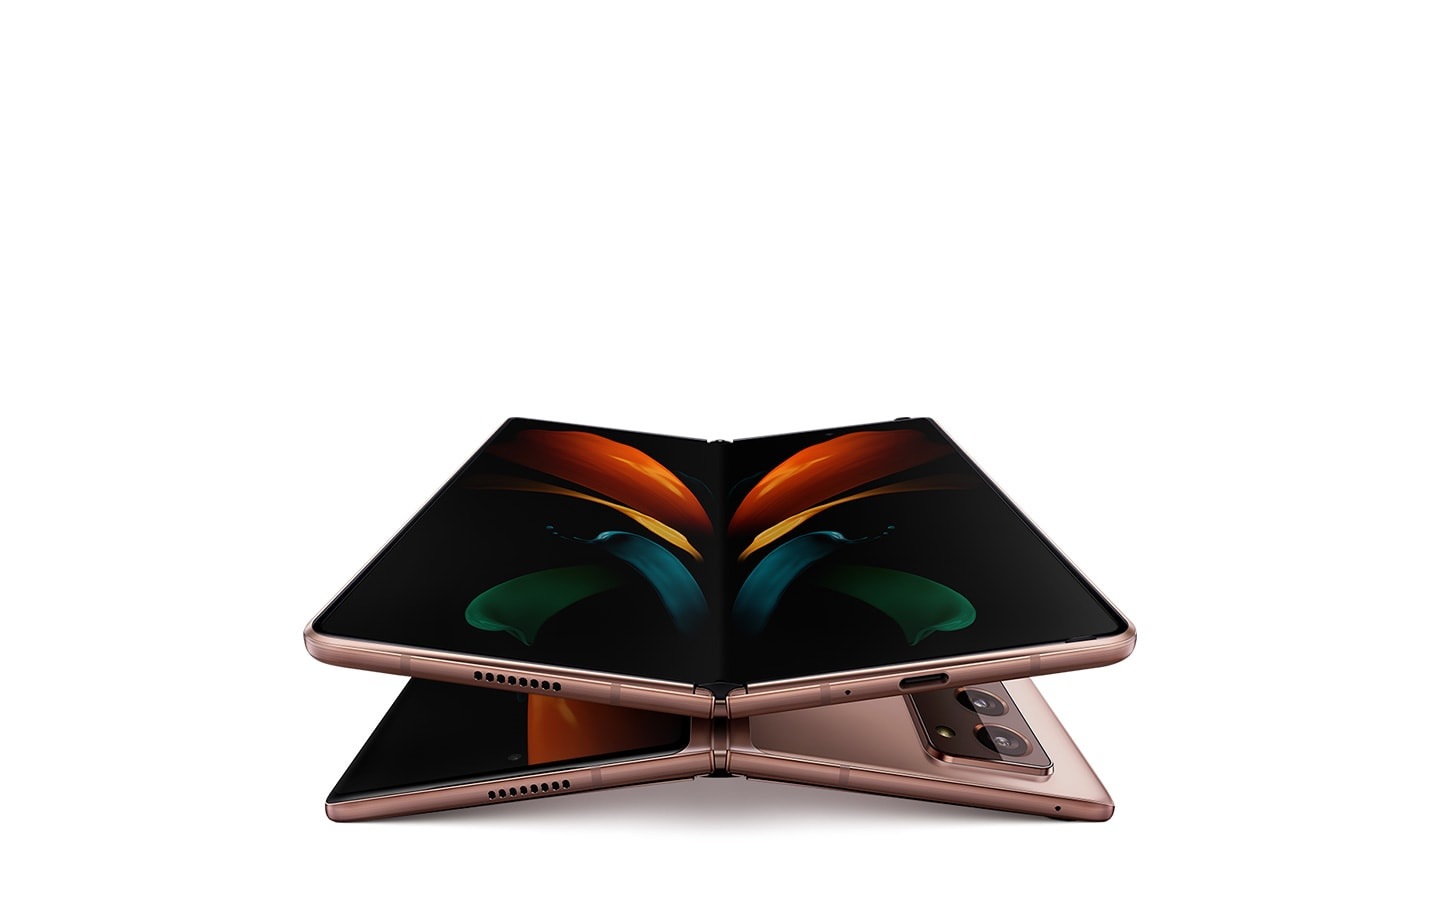 Two unfolded Galaxy Z Fold2 5G phones in Mystic Bronze, one laying face up and the other laying facedown. The one seen from the front is on top of the one seen laying facedown and has the butterfly wallpaper onscreen.